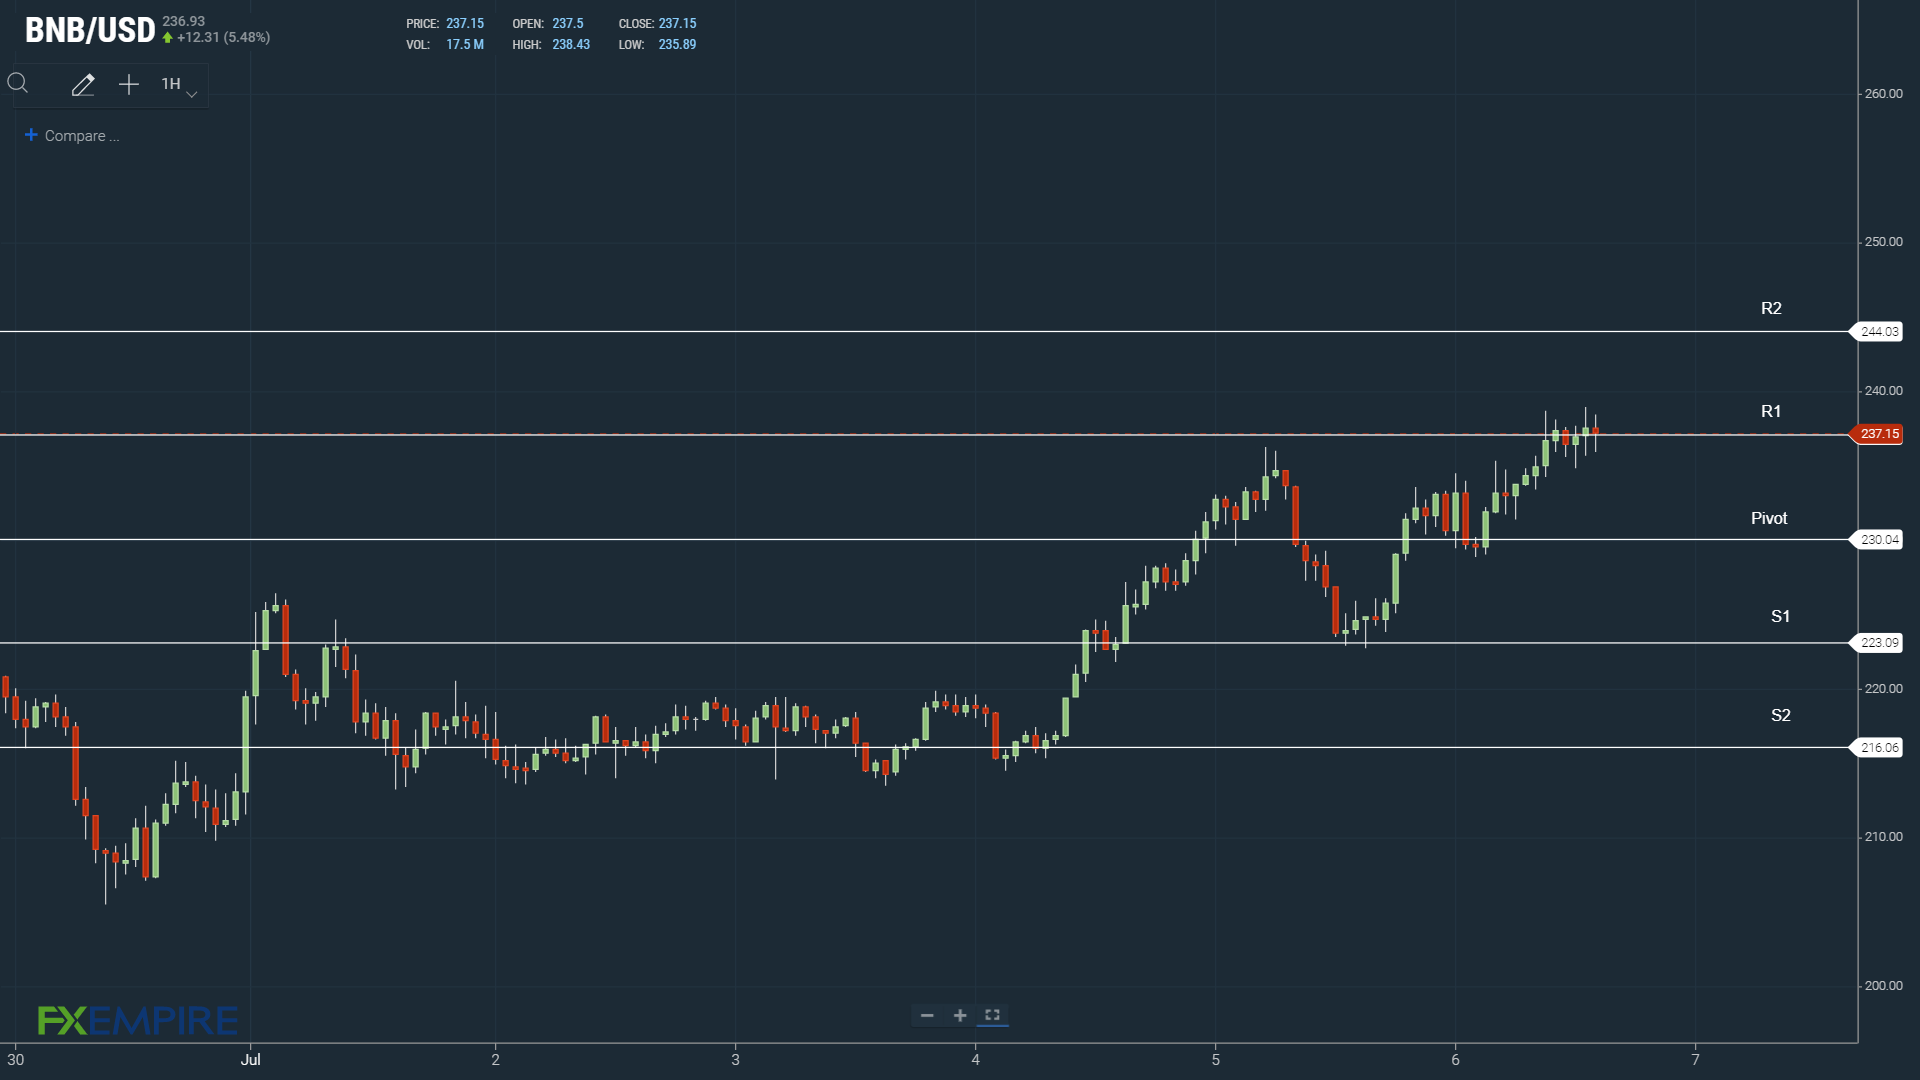 BNB resistance levels in play